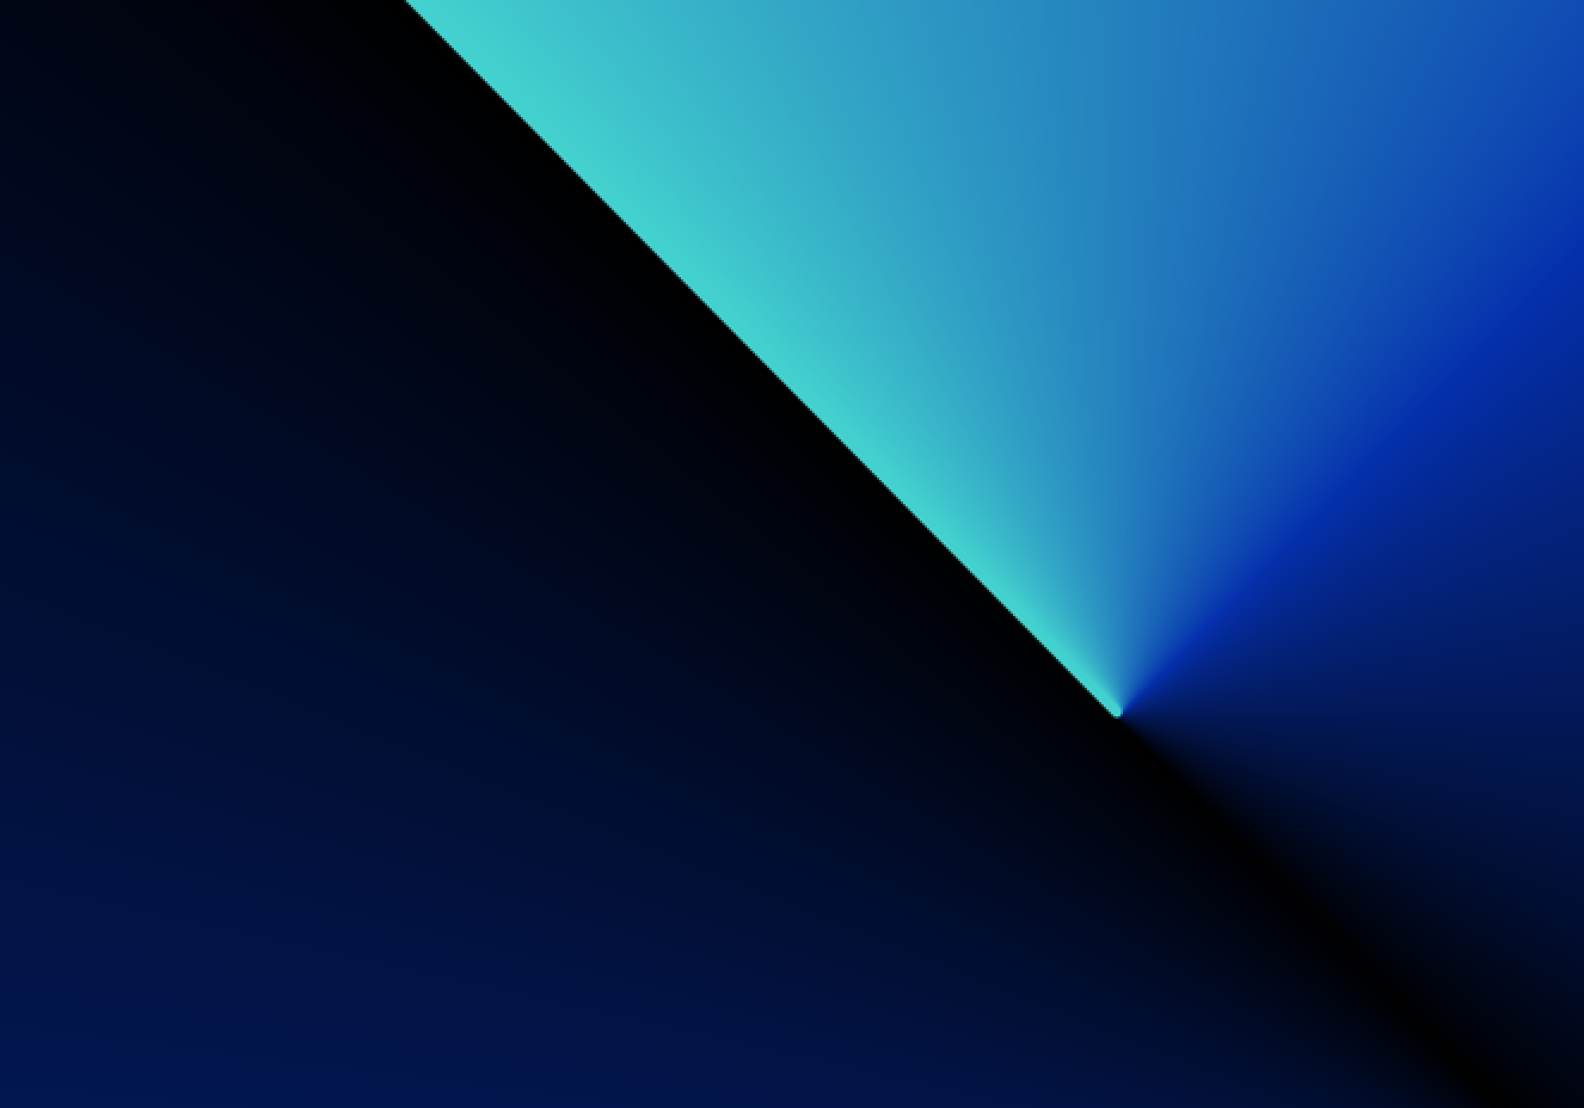 Black and Blue Gradient Background